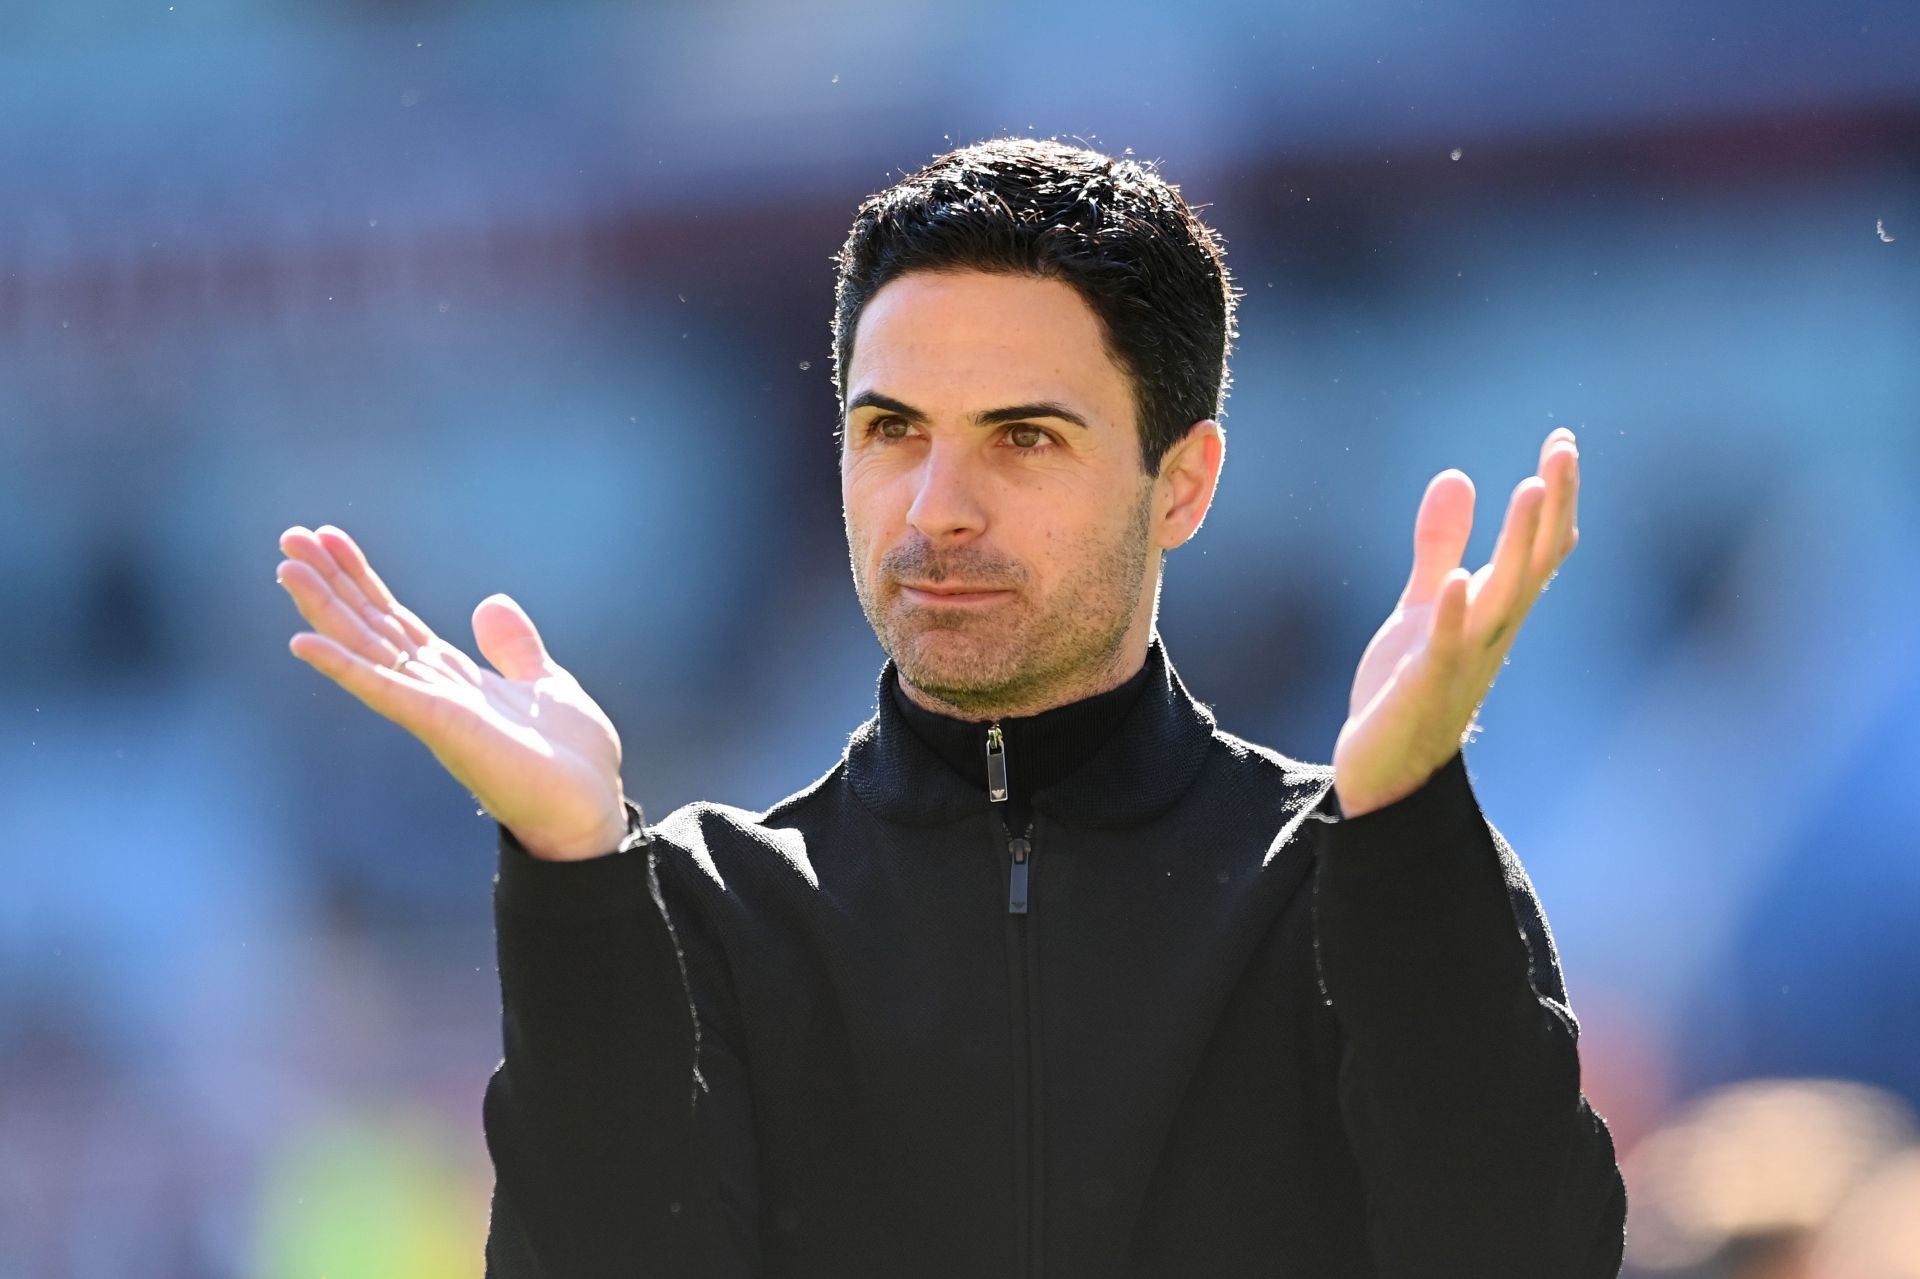 Arsenal have been in fine form under Mikel Arteta in the second half of this season